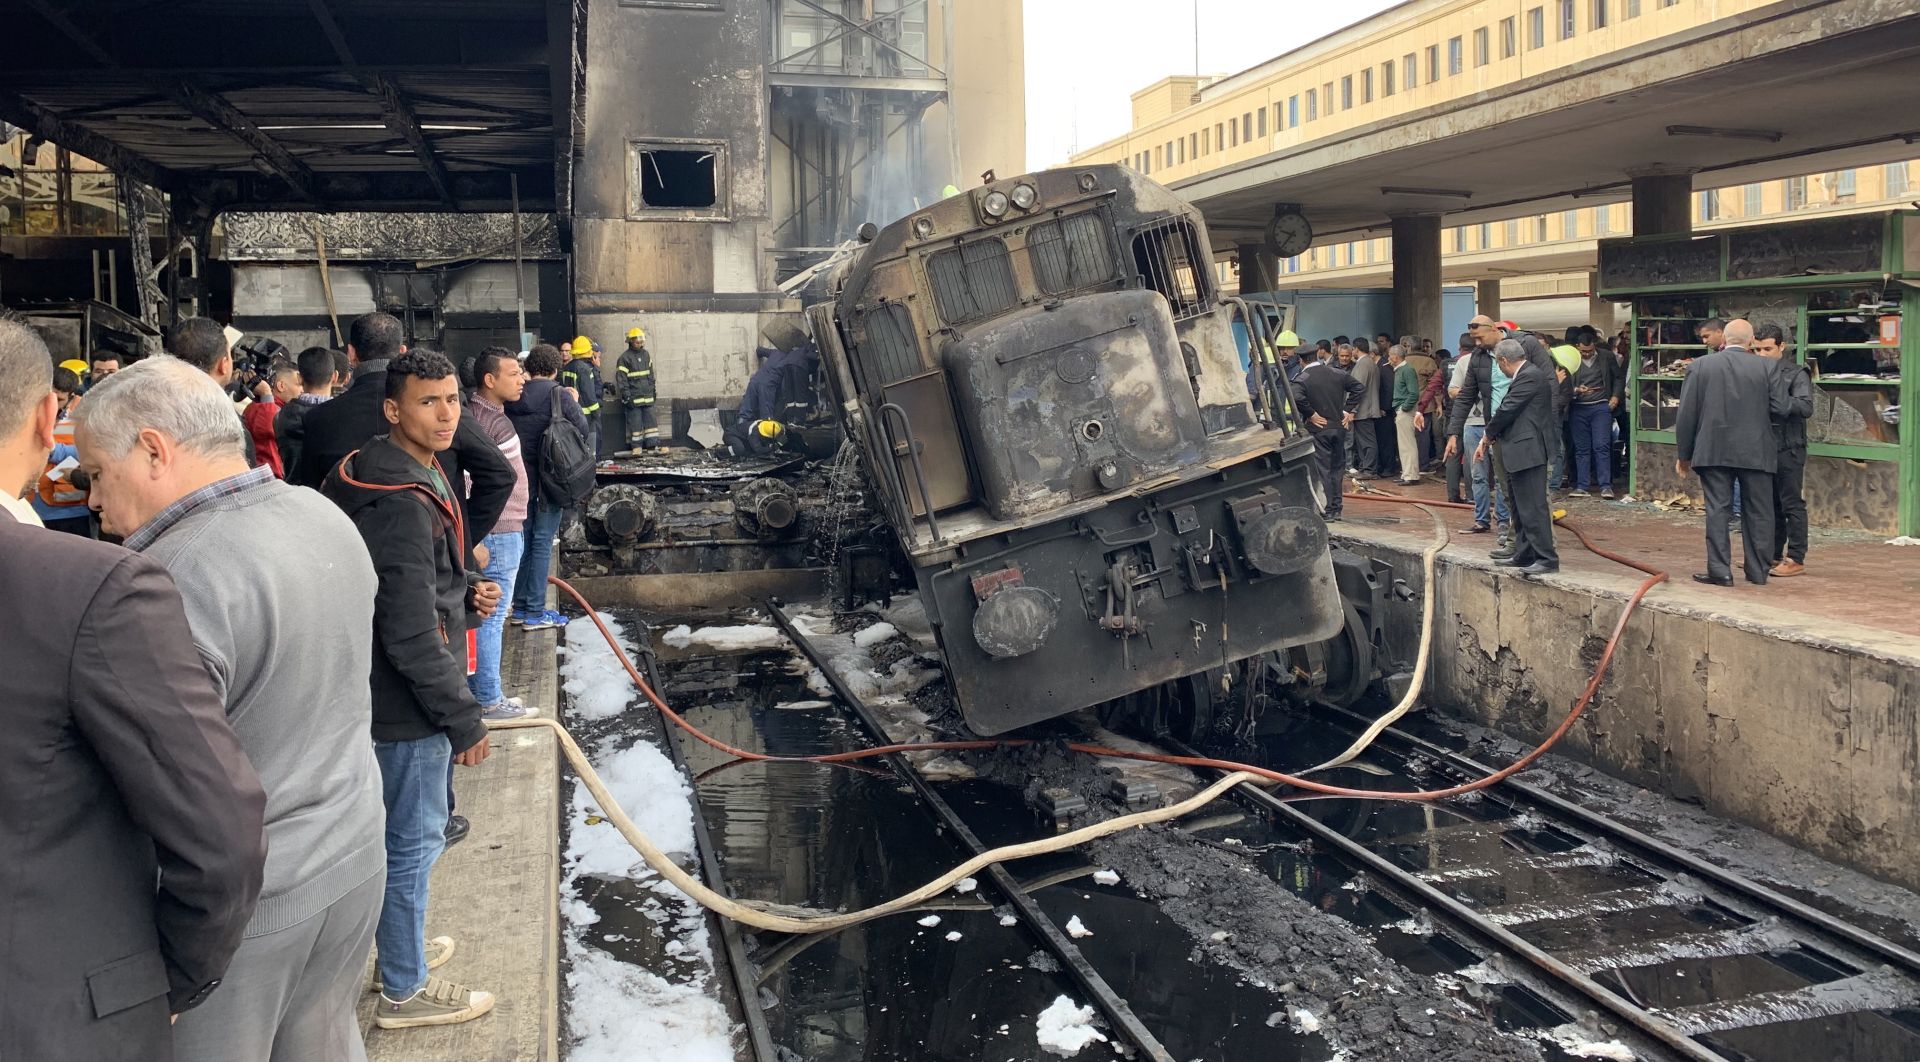 epa07400366 A destroyed train restst on tracks at the main train station in Cairo, Egypt, 27 February 2019. Local media reports state at least ten people died and 22 were injured after a large fire engulfed an area at the main train station, possible triggered by an explosion of a fuel tank of a passing train. It is feared the number of casualties could rise.  EPA/KHALED ELFIQI